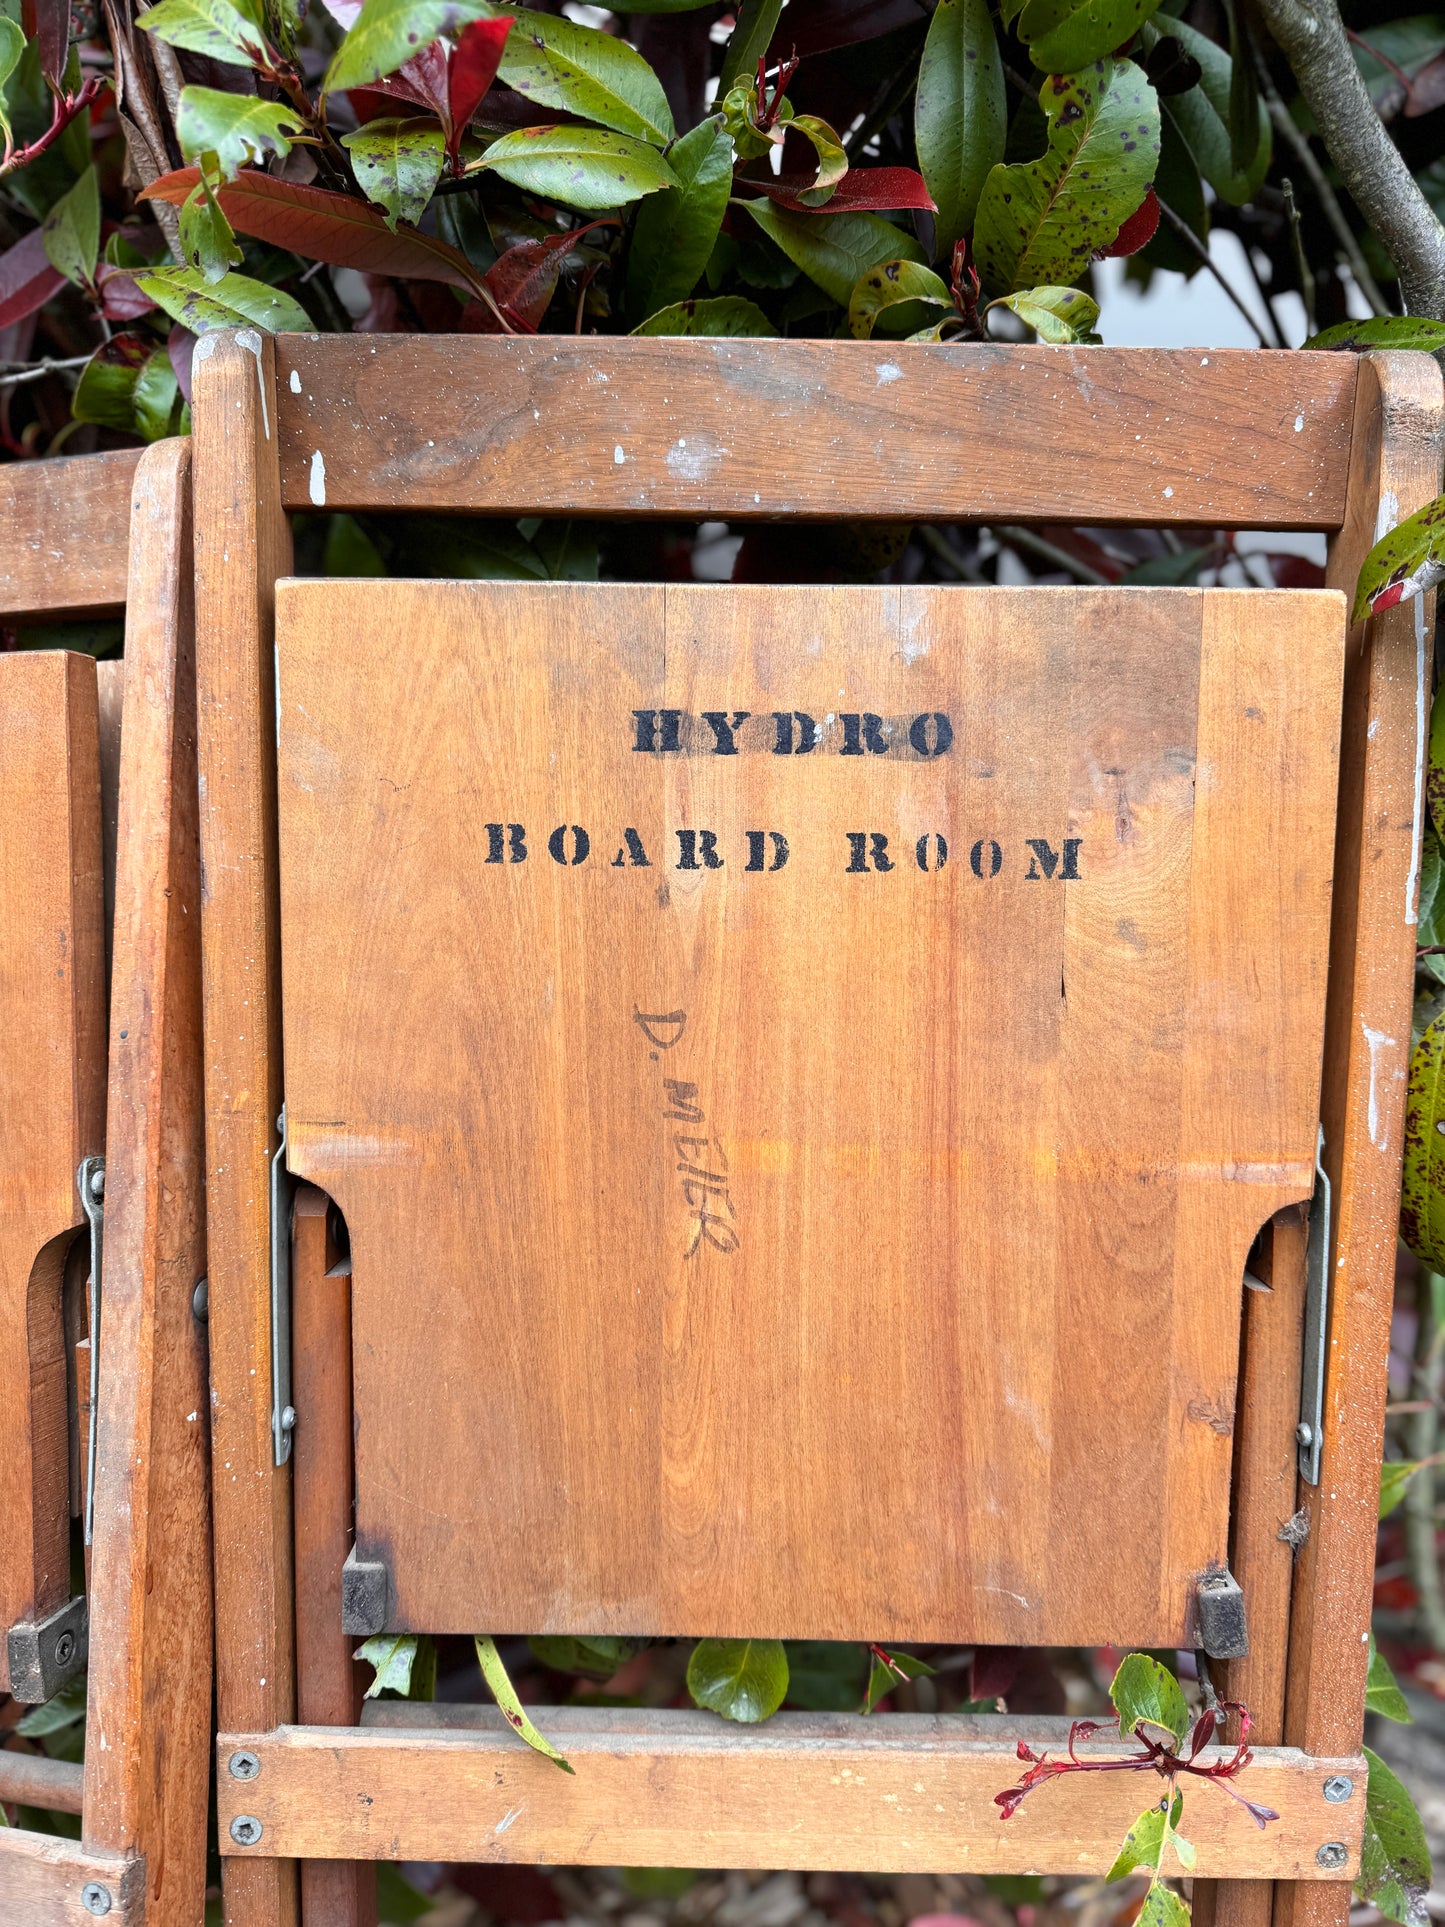 The Hydro Board Room Chairs